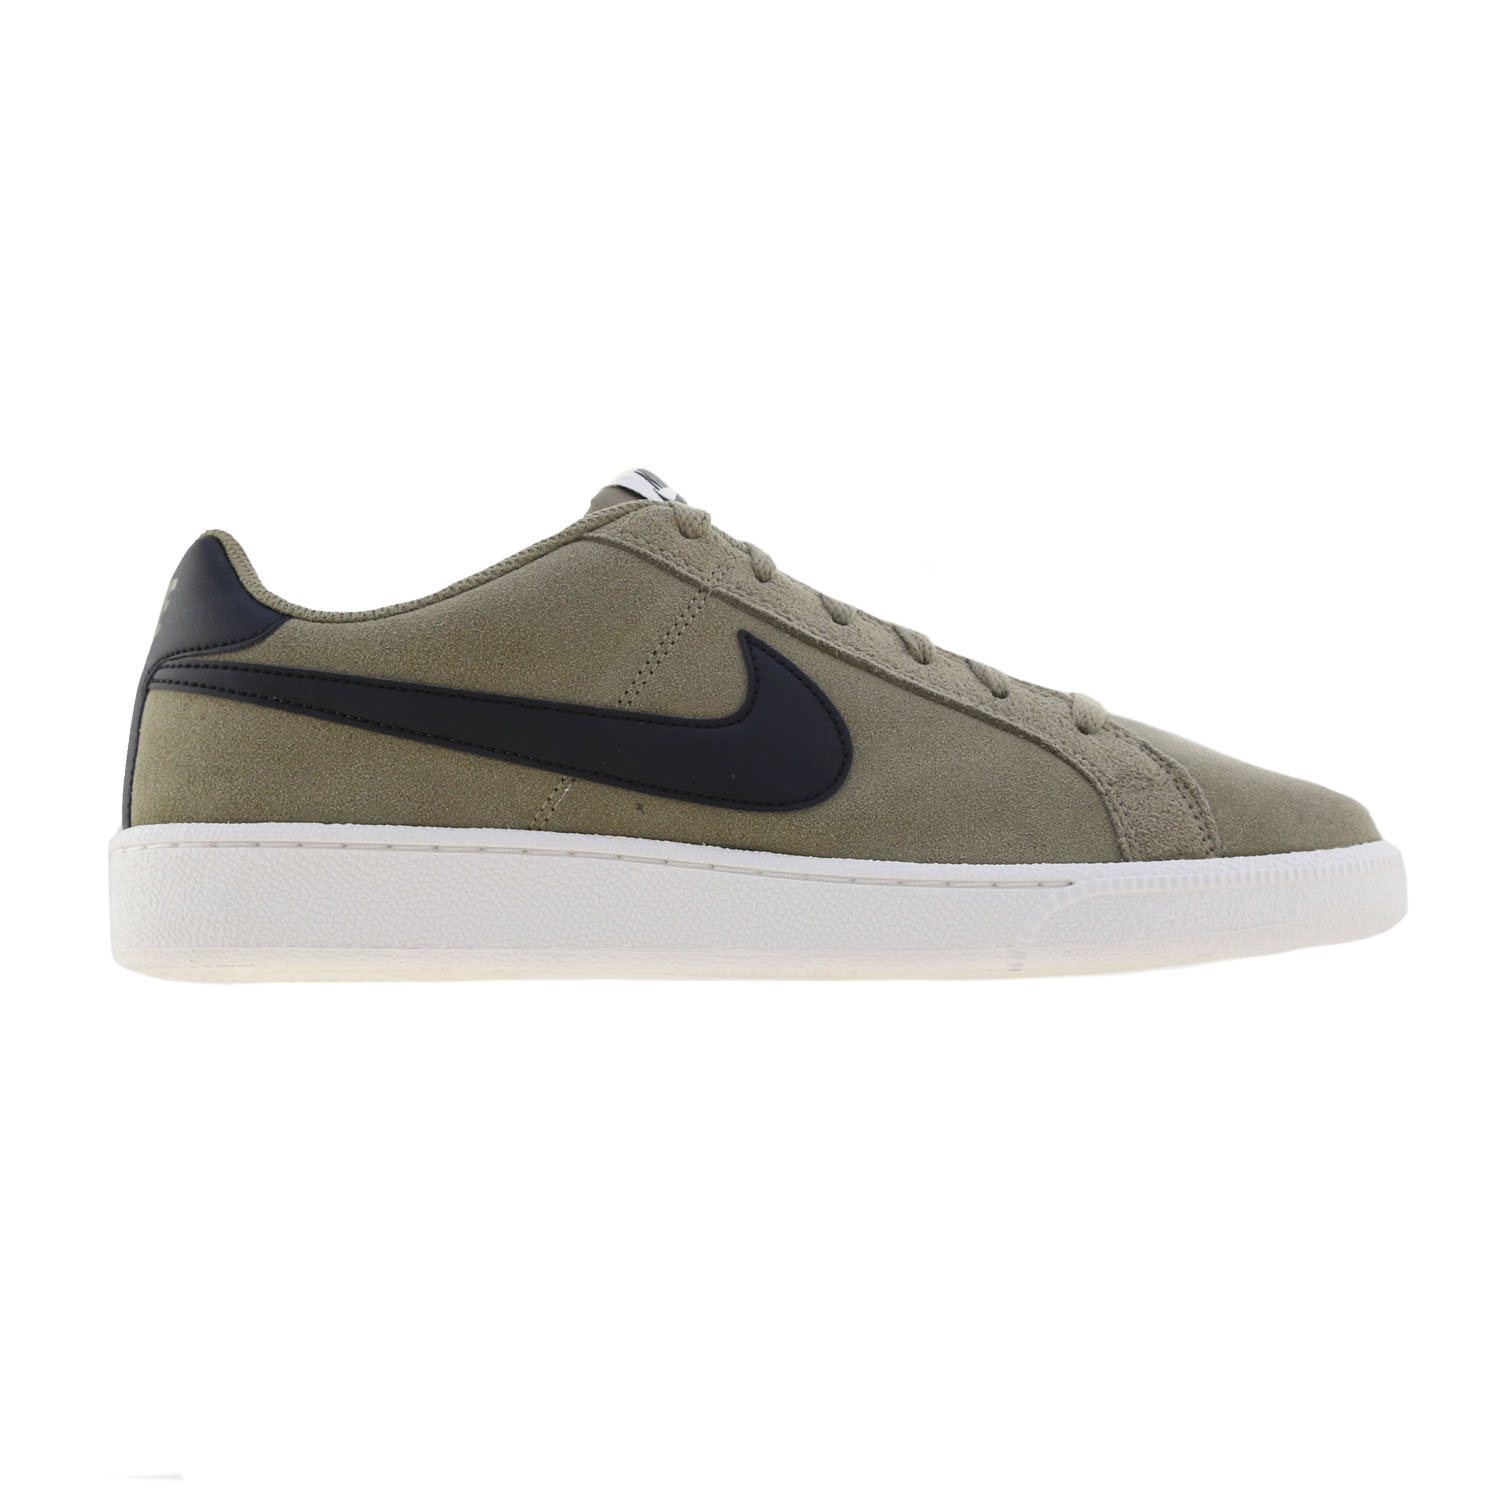 Nike Court Royale Suede M ( 819802-200 )